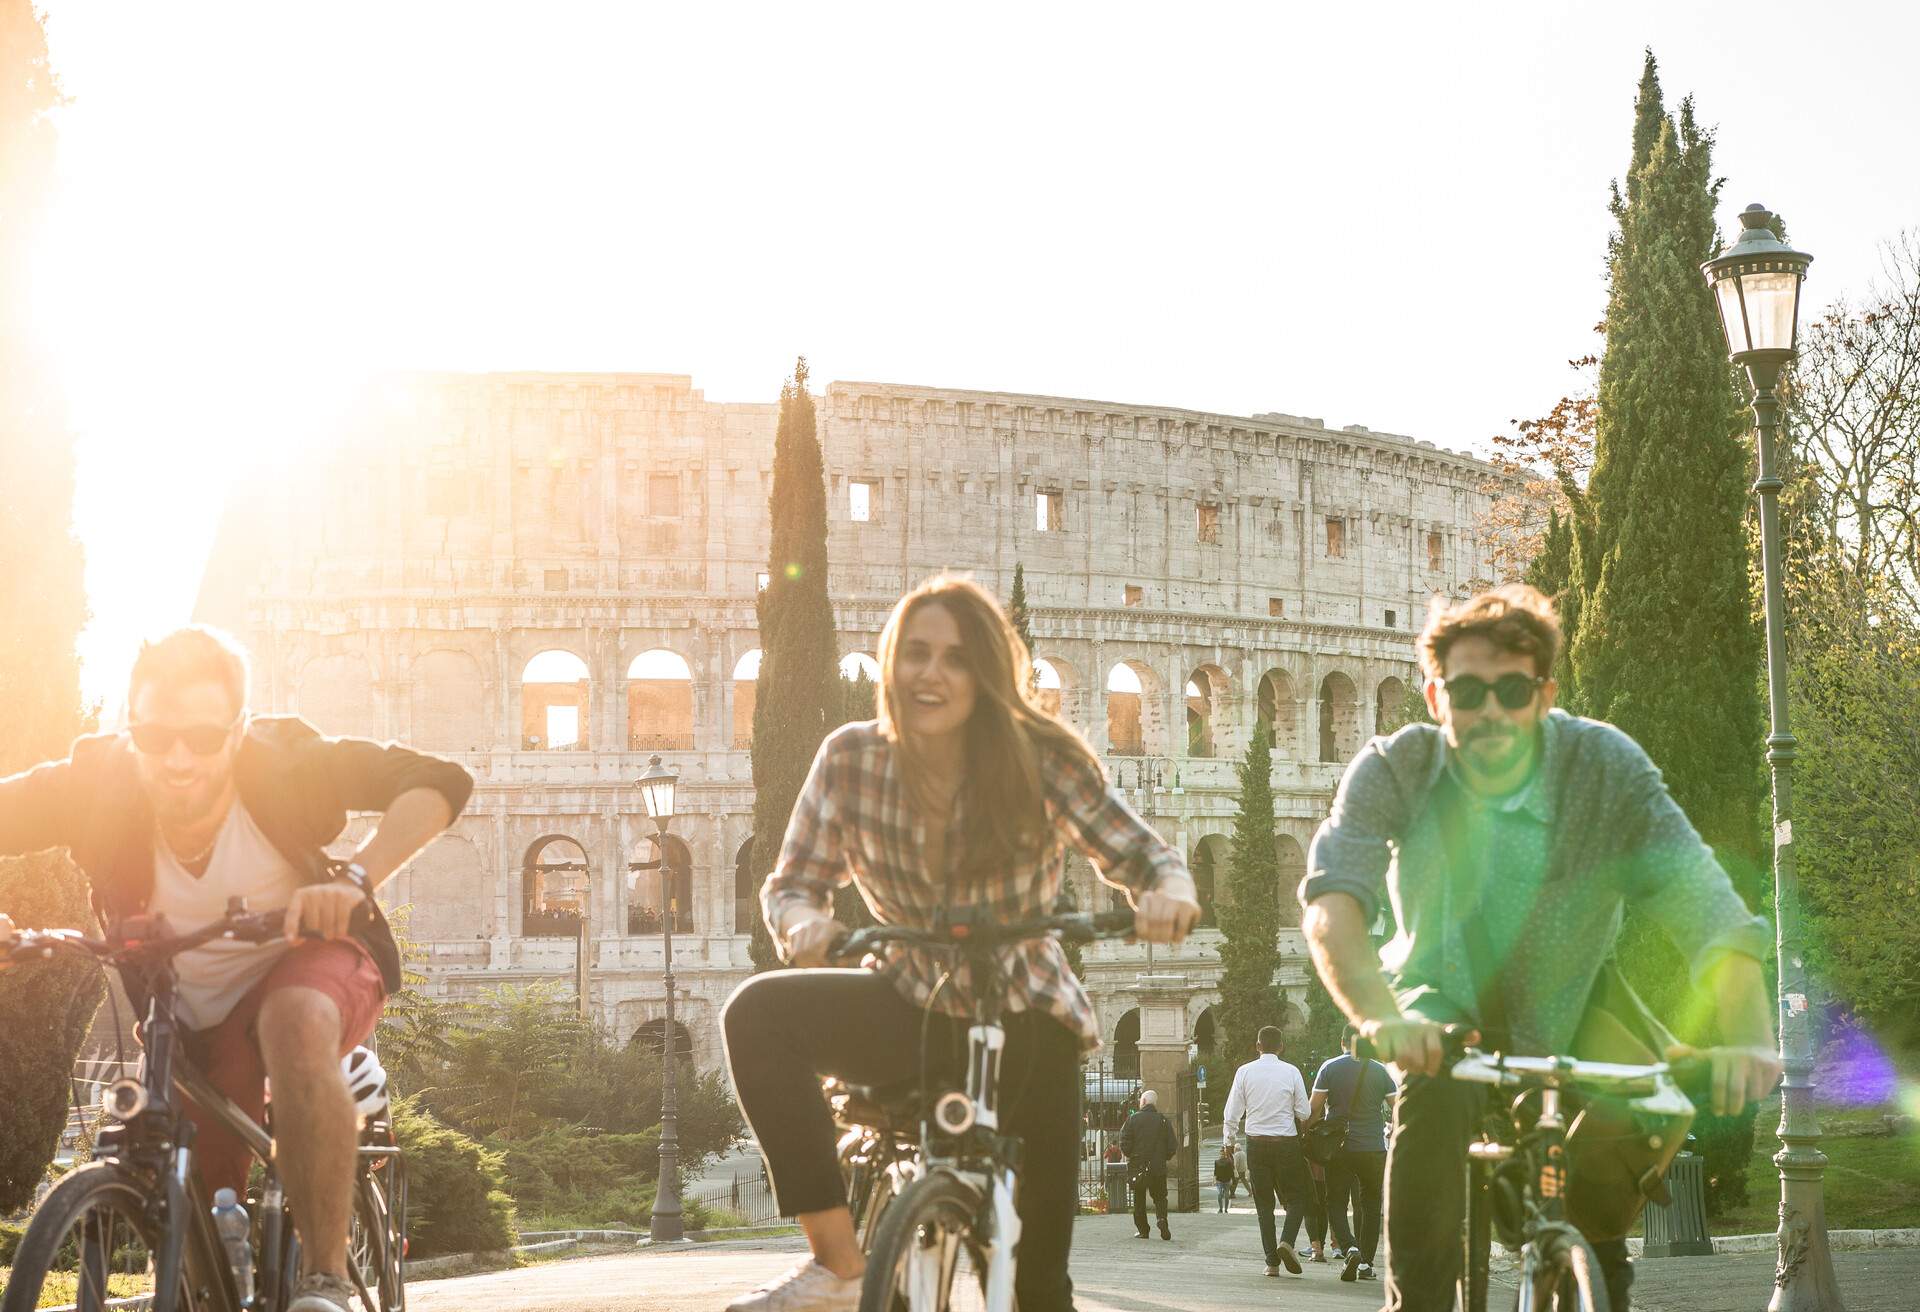 dest_italy_rome_theme_people_young-friends_riding-bikes_in_colle_oppio_gettyimages-915205812_universal_within-usage-period_66181.jpg